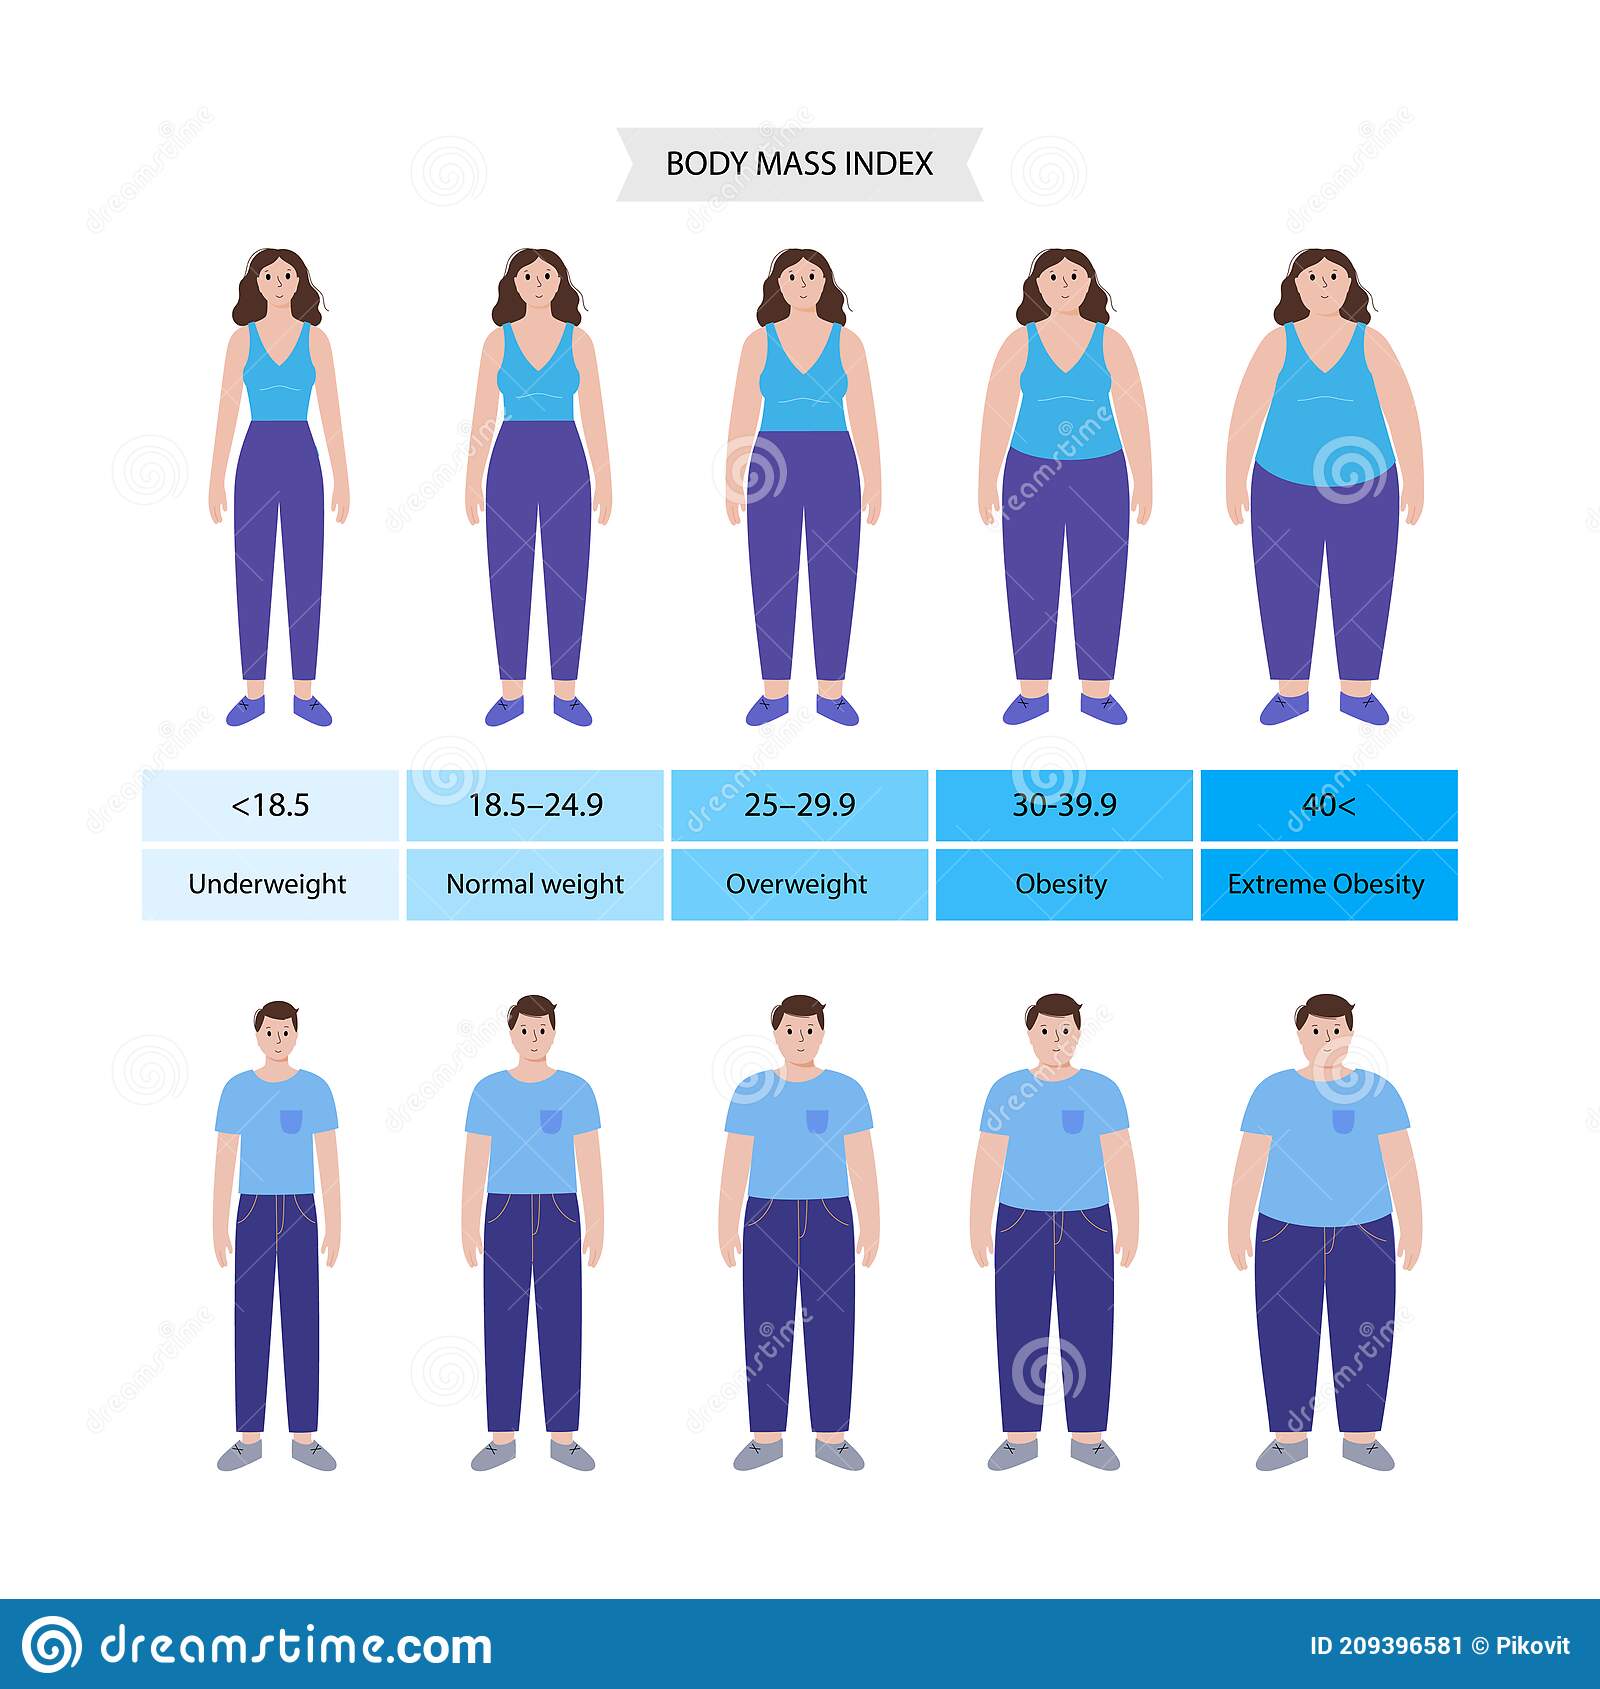 Bmi Obese Ranges